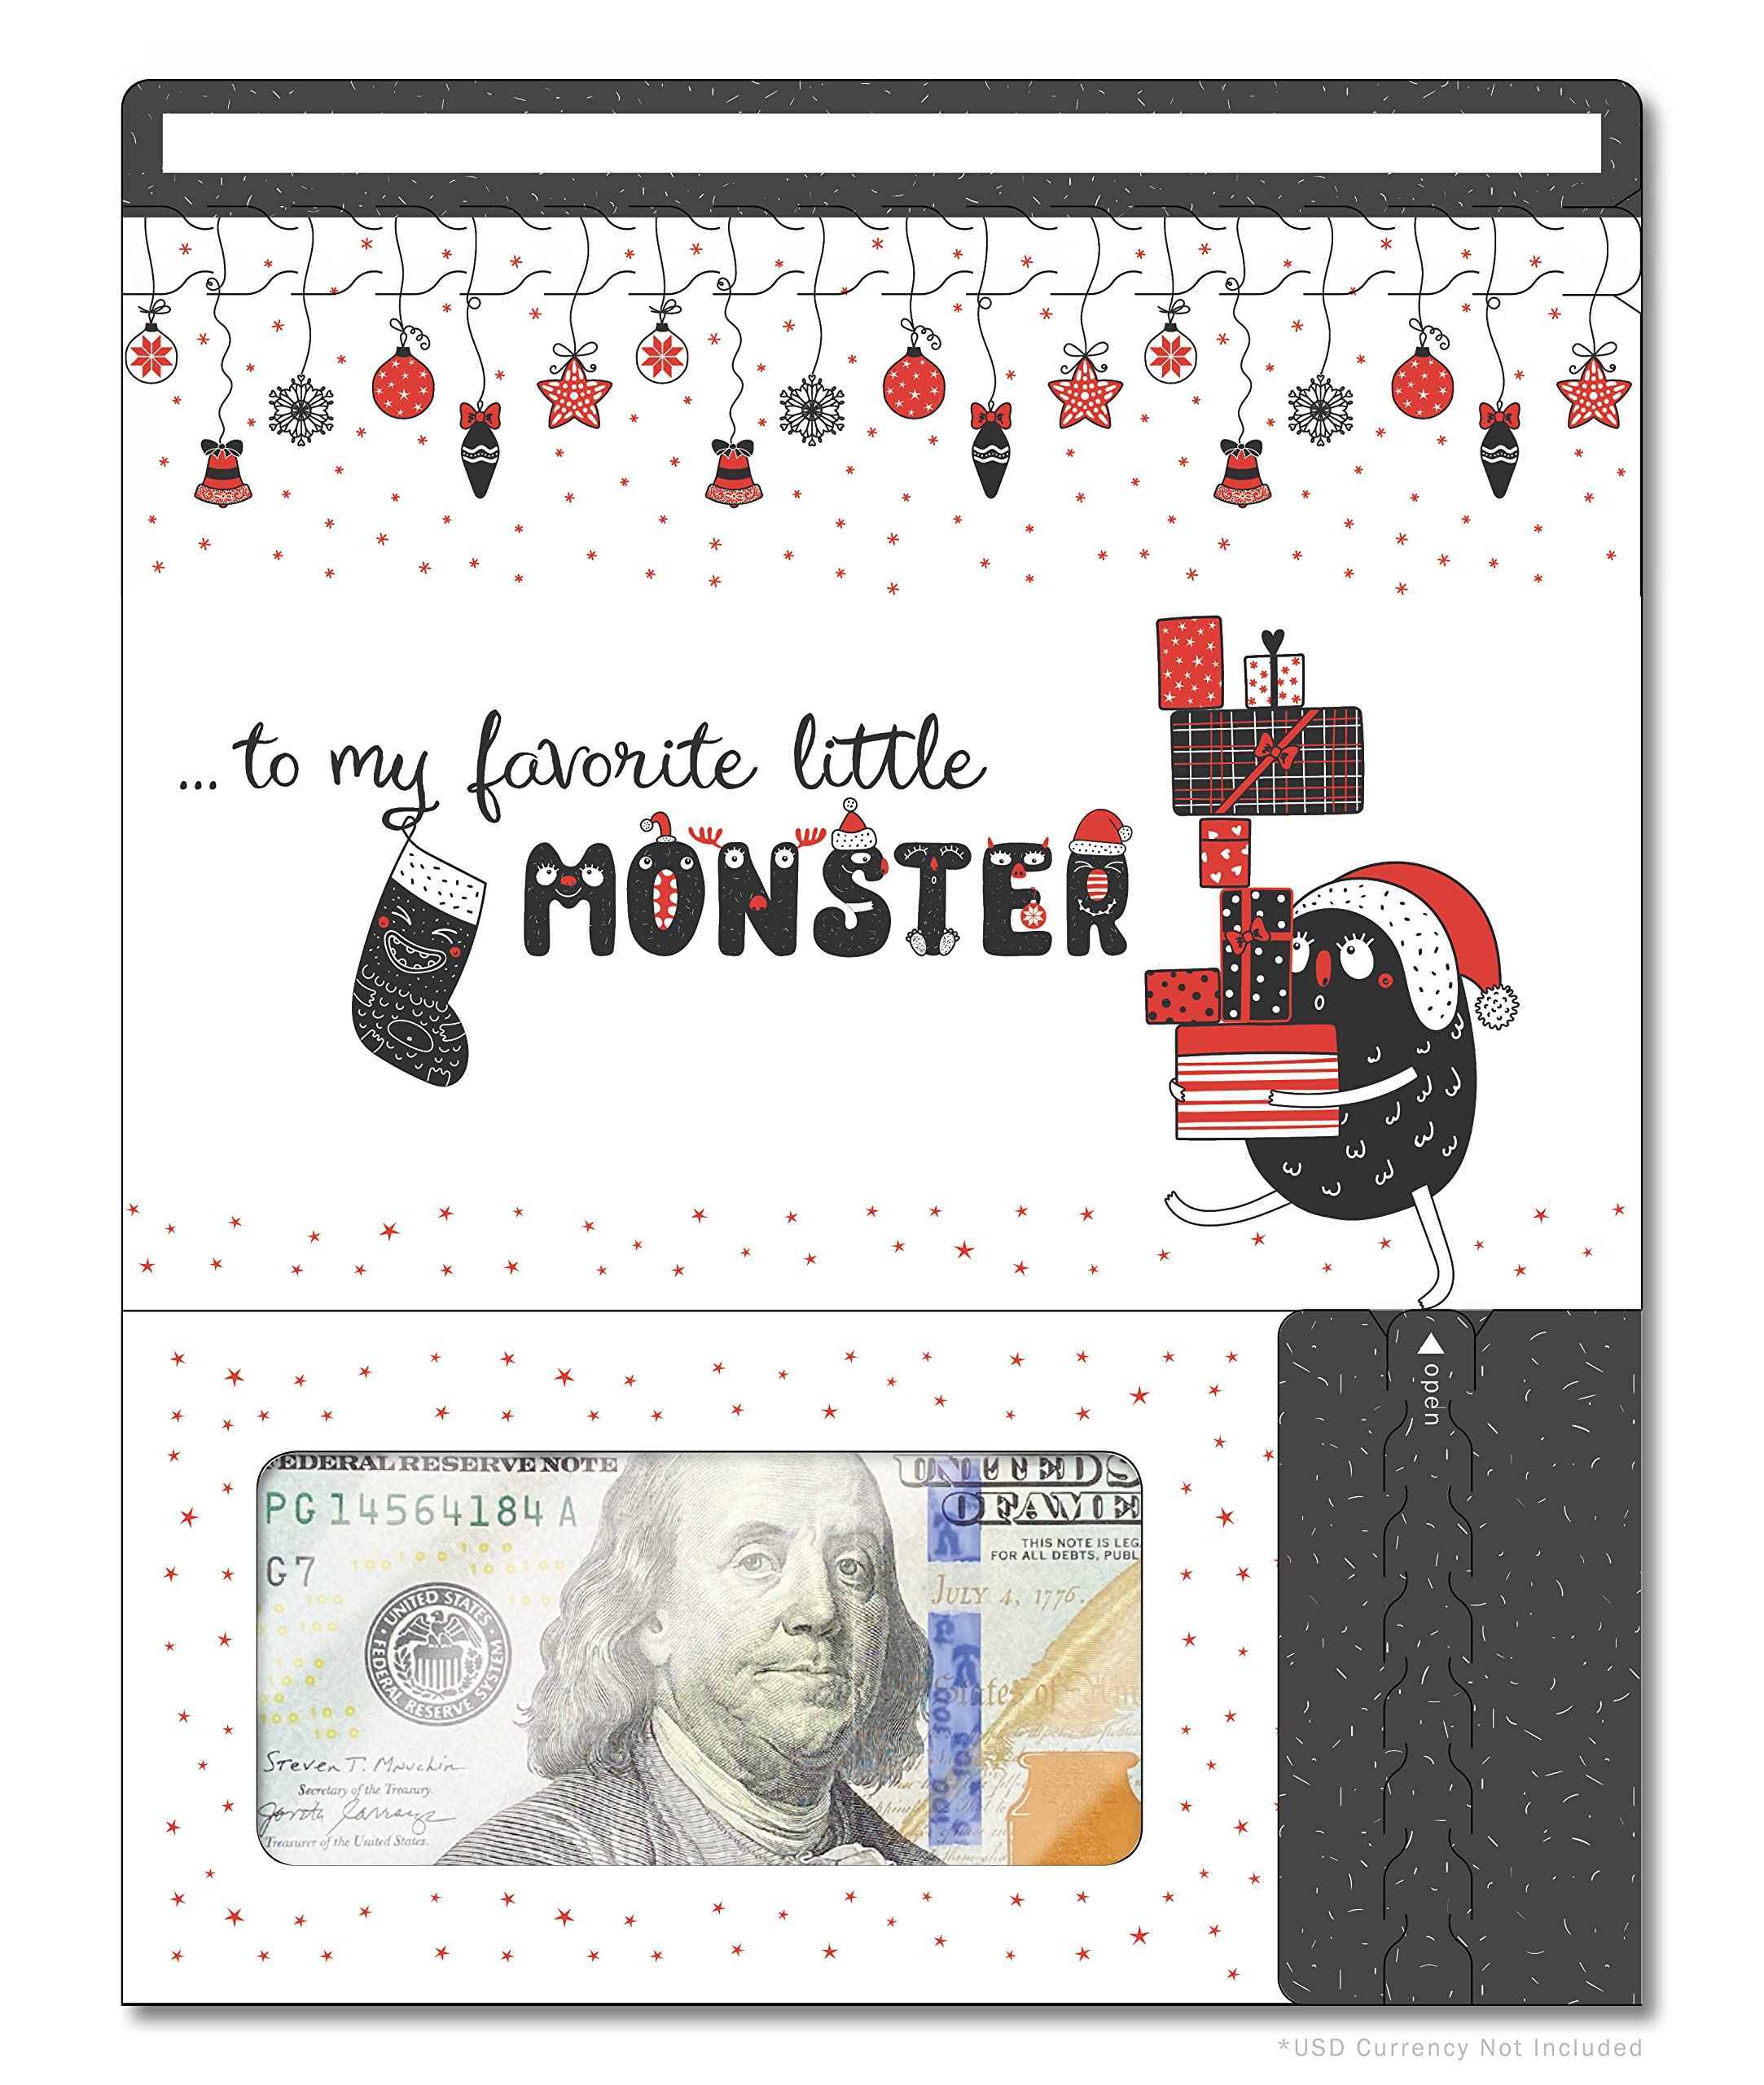 Zipgifts Holiday Card Zip-Open Money Holder Wclear Plastic Window For Cash, Check, Gift Card (Favorite Little Monster)